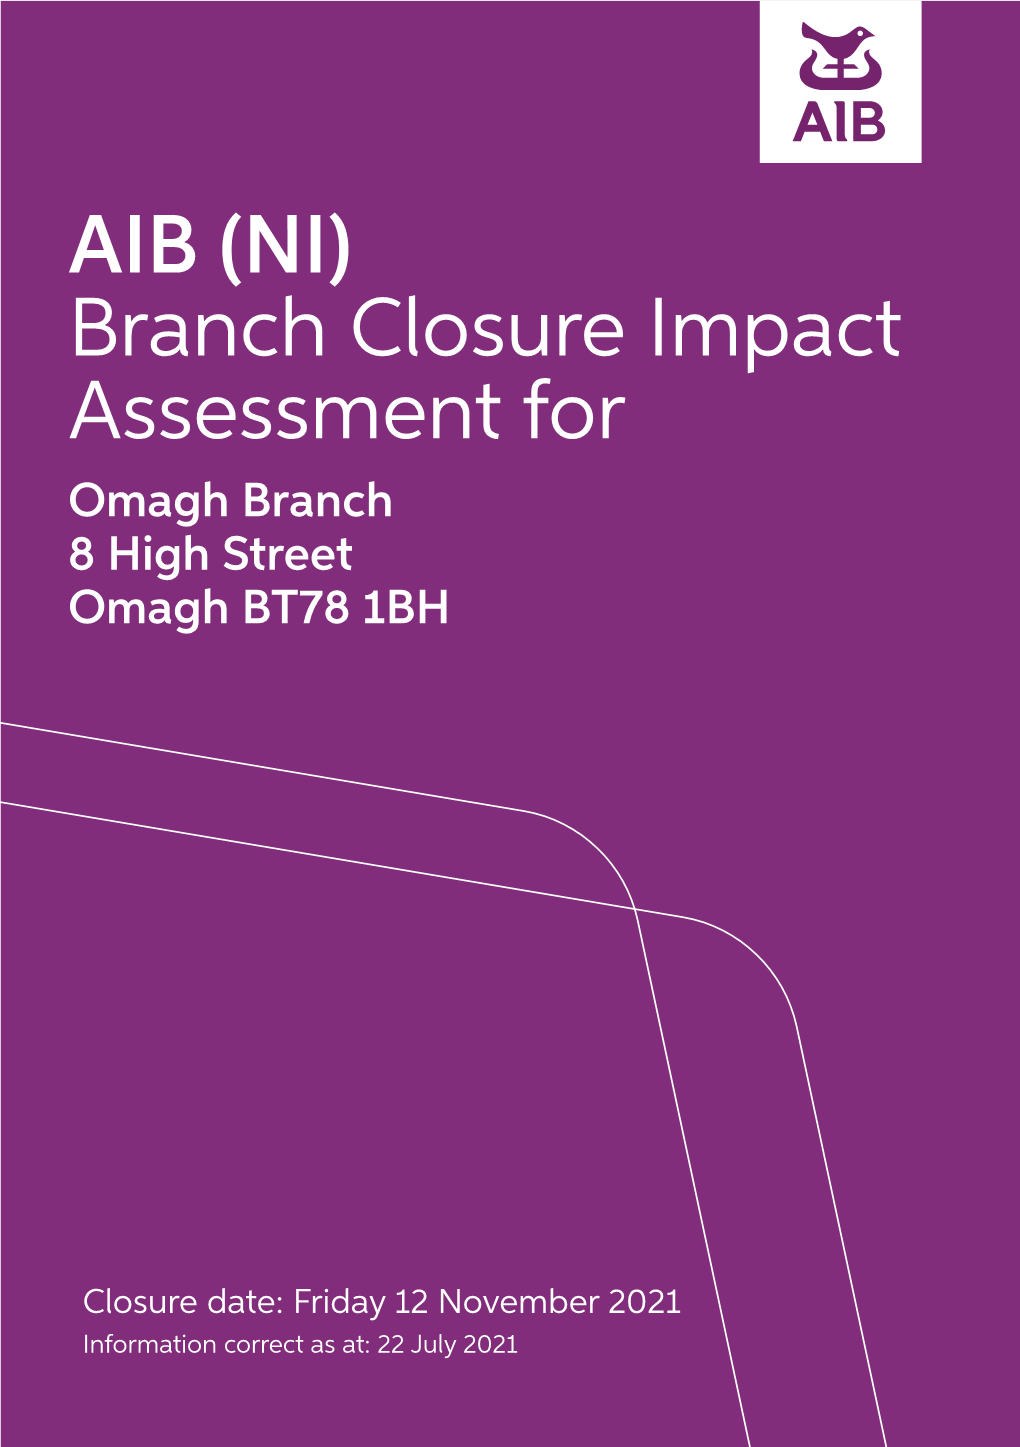 AIB (NI) Branch Closure Impact Assessment for Omagh Branch 8 High Street Omagh BT78 1BH